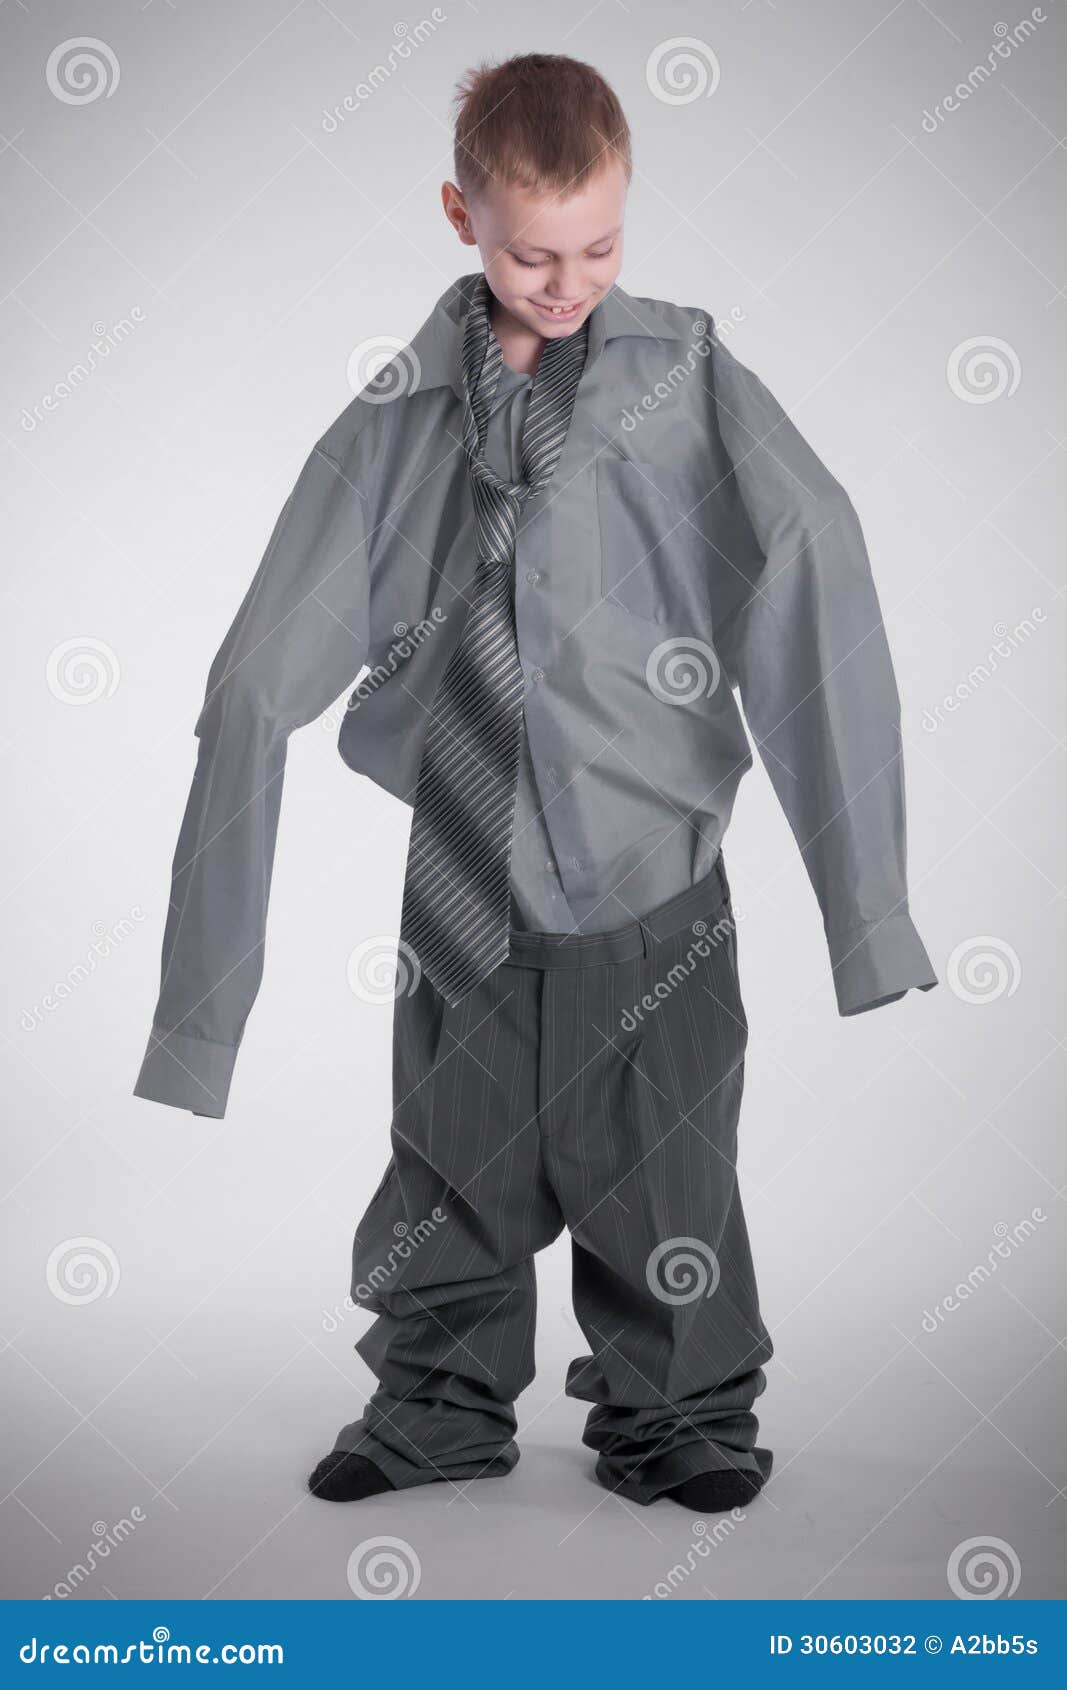 Boy in big shirt stock Image of front, hand, smiling - 30603032